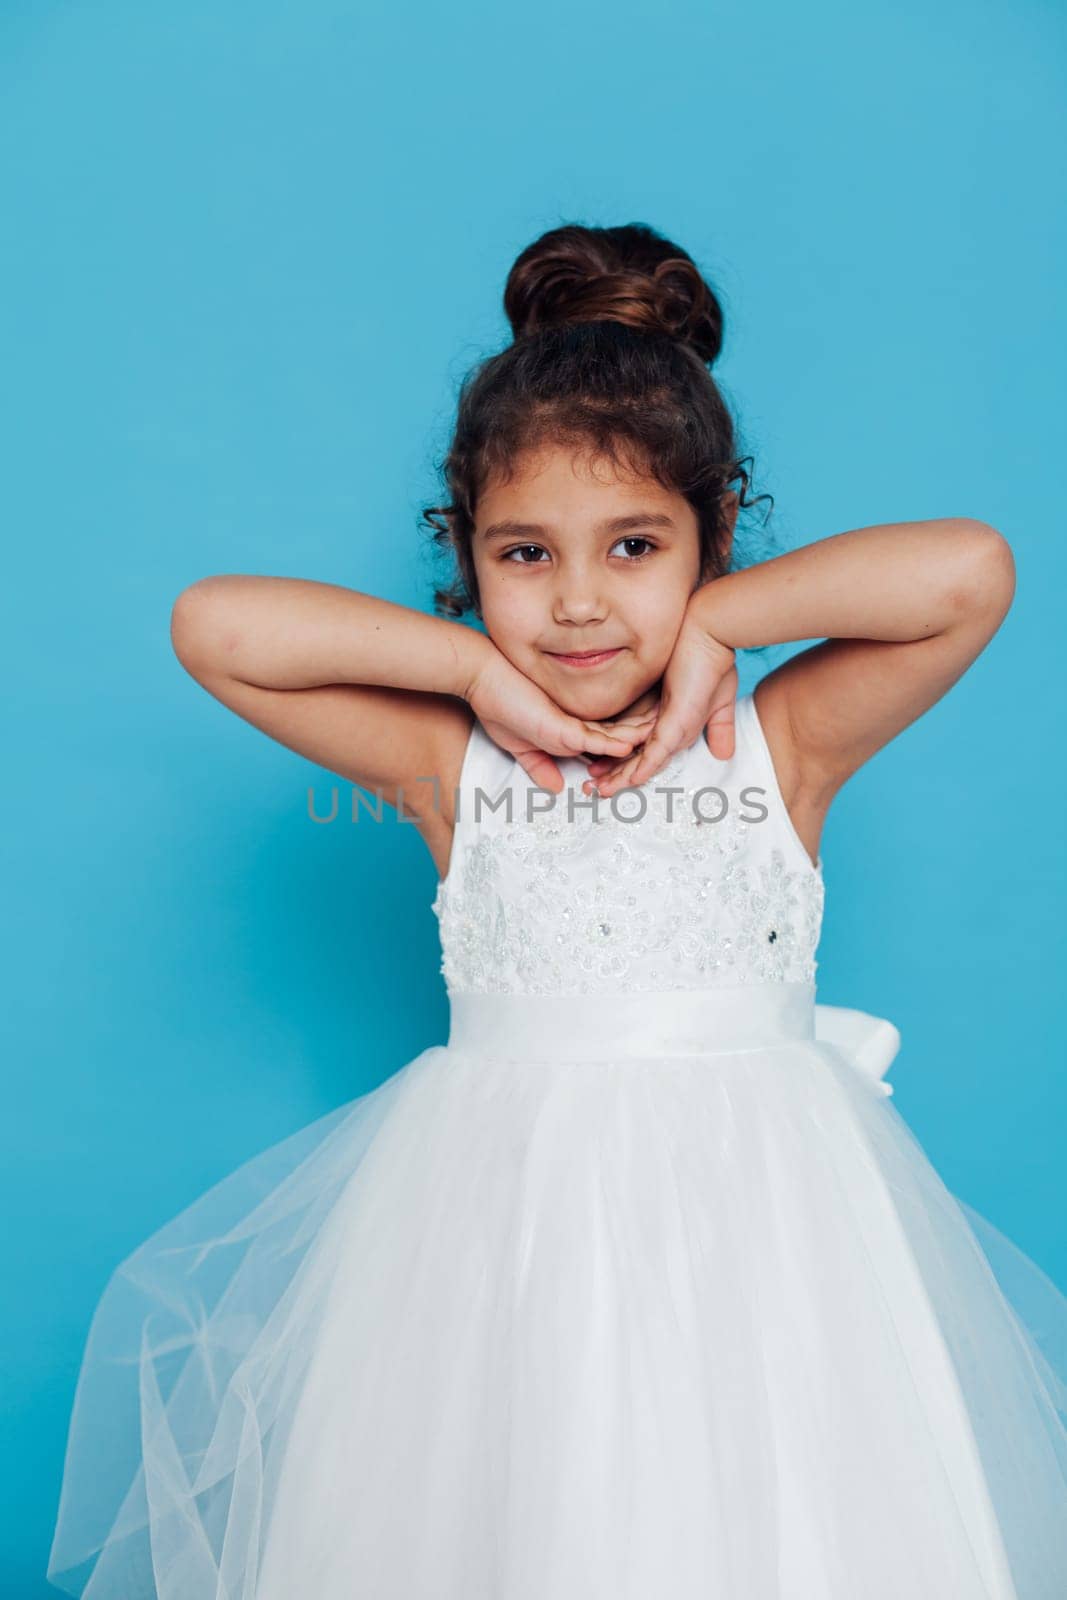 a little girl in white dress with a hairstyle poses on a blue background